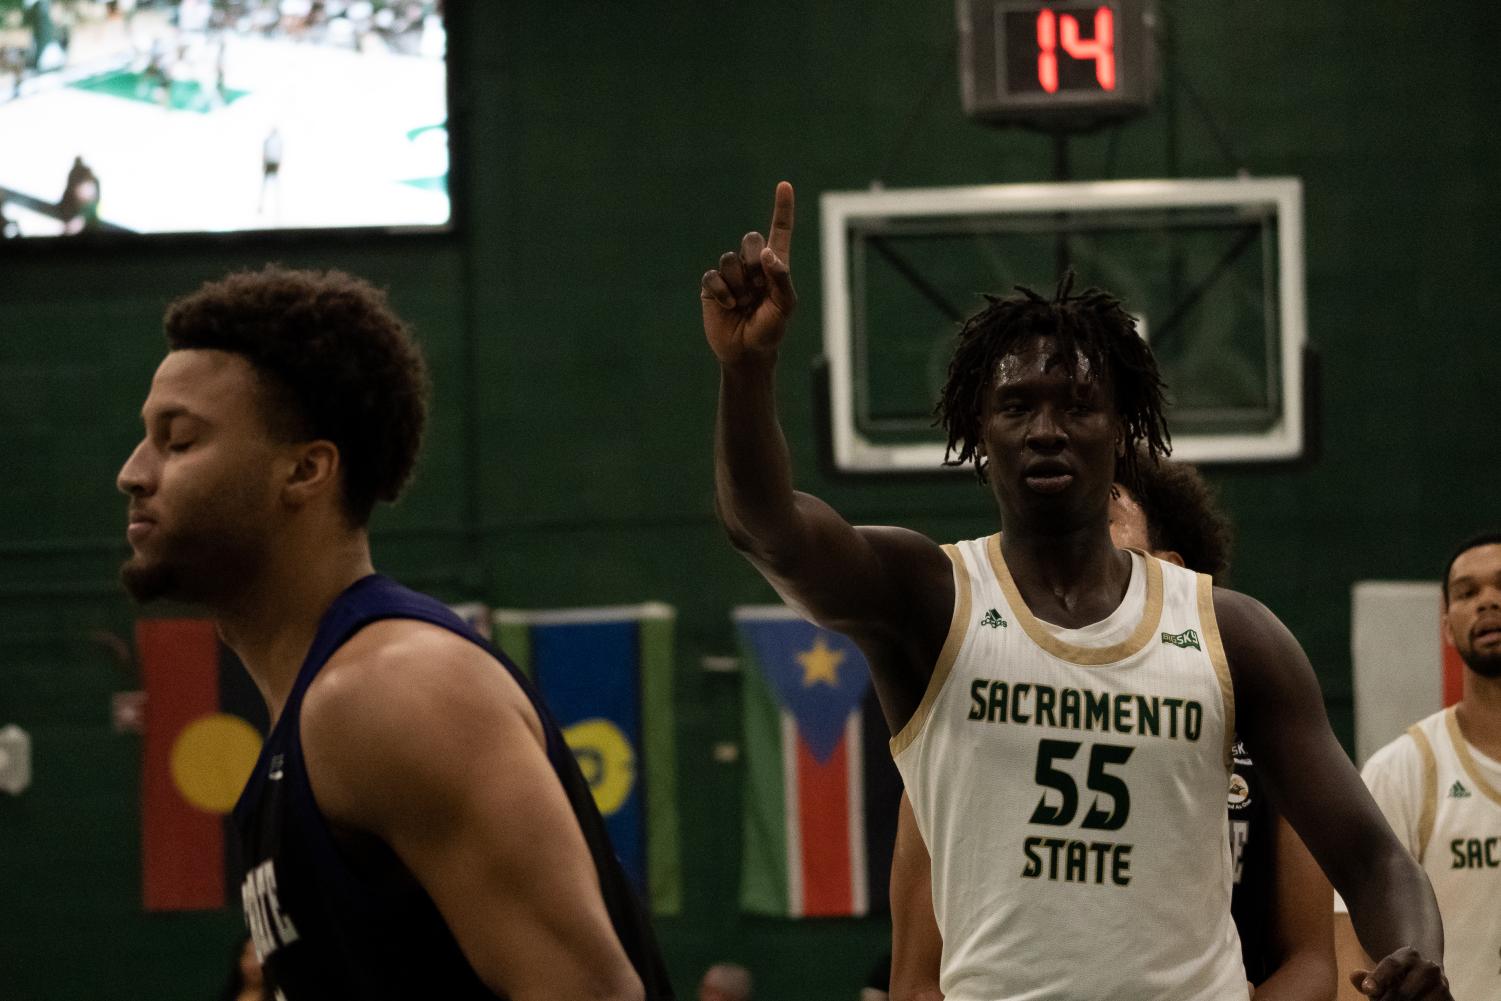 Junior forward Akol Mawein holds a finger towards the baseline at The Nest on Thursday, Feb. 16, 2023 in a 52-49 Hornet loss. Mawein had 11 points in 20 minutes Thursday’s loss to Weber State.